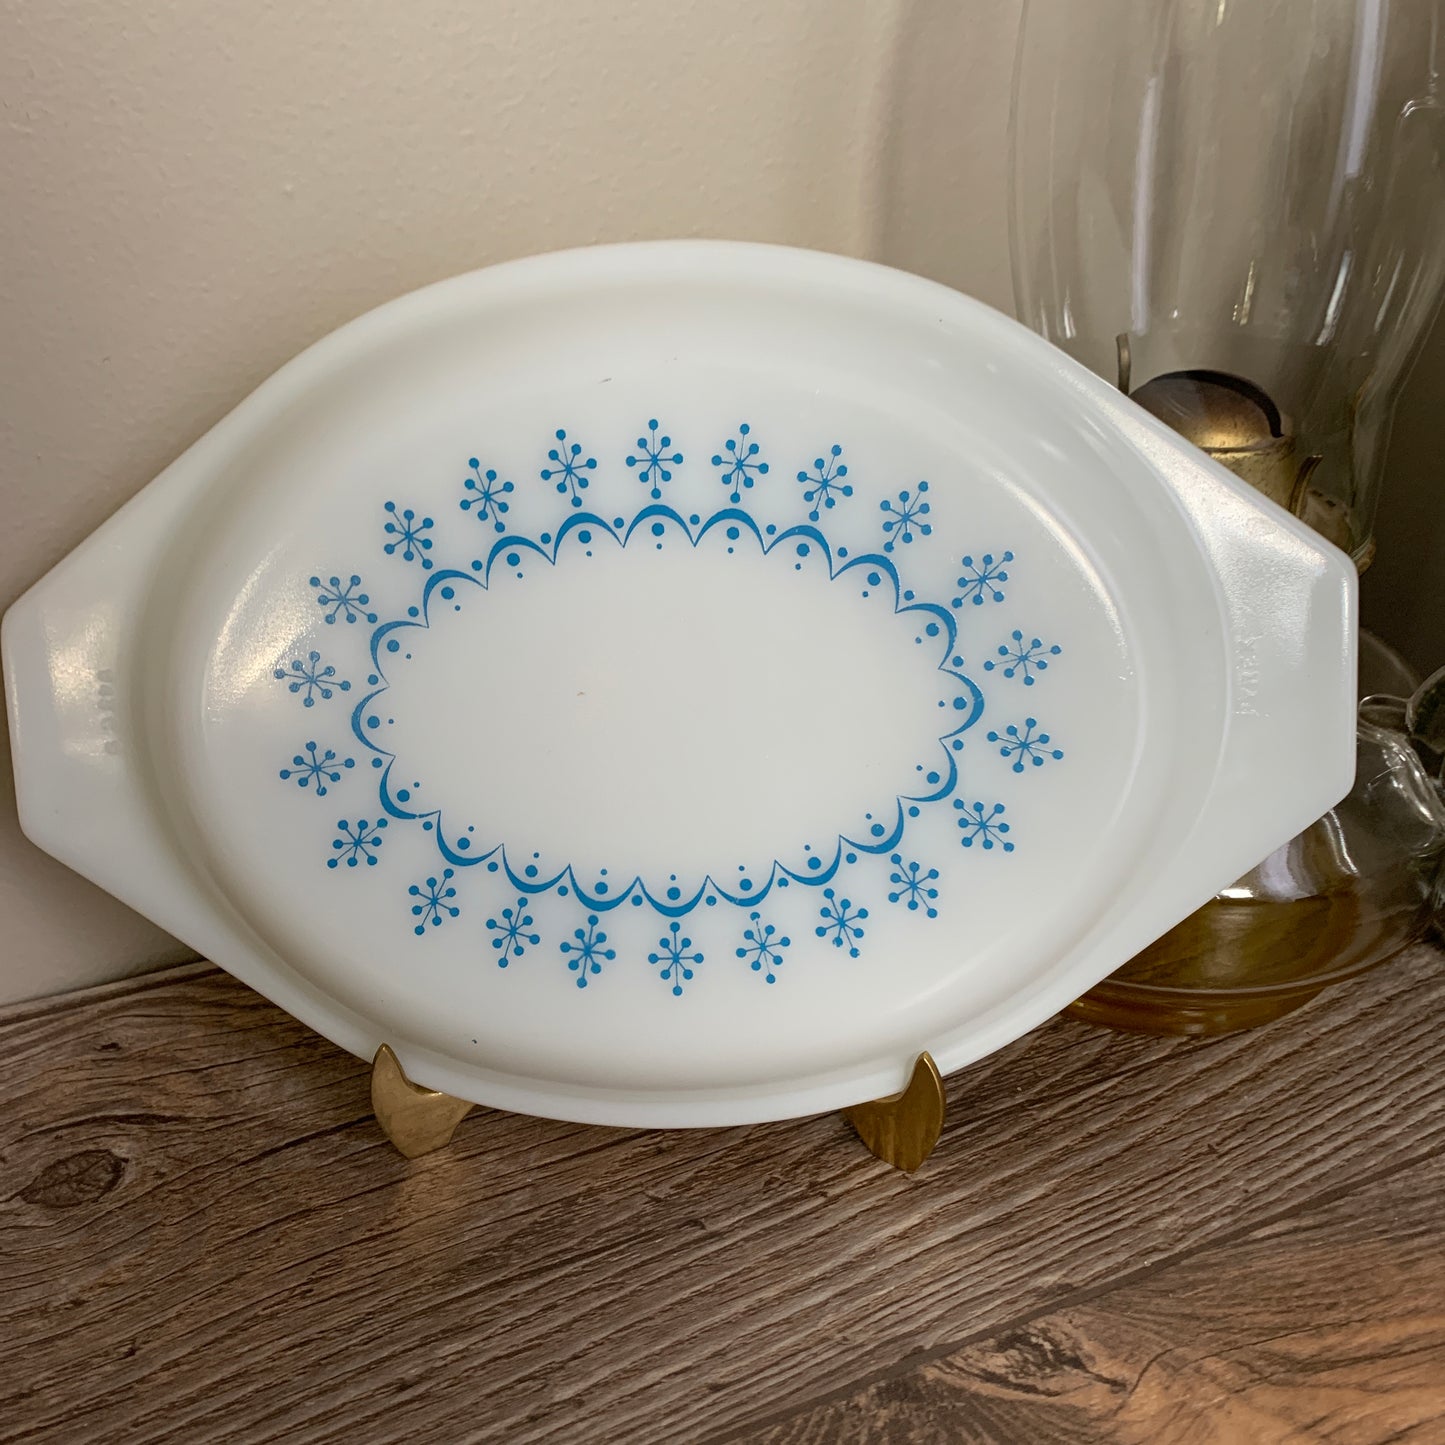 Pyrex Replacement Lid Pyrex Snowflake Lid Replacement Oval Lid Pyrex Garland 943